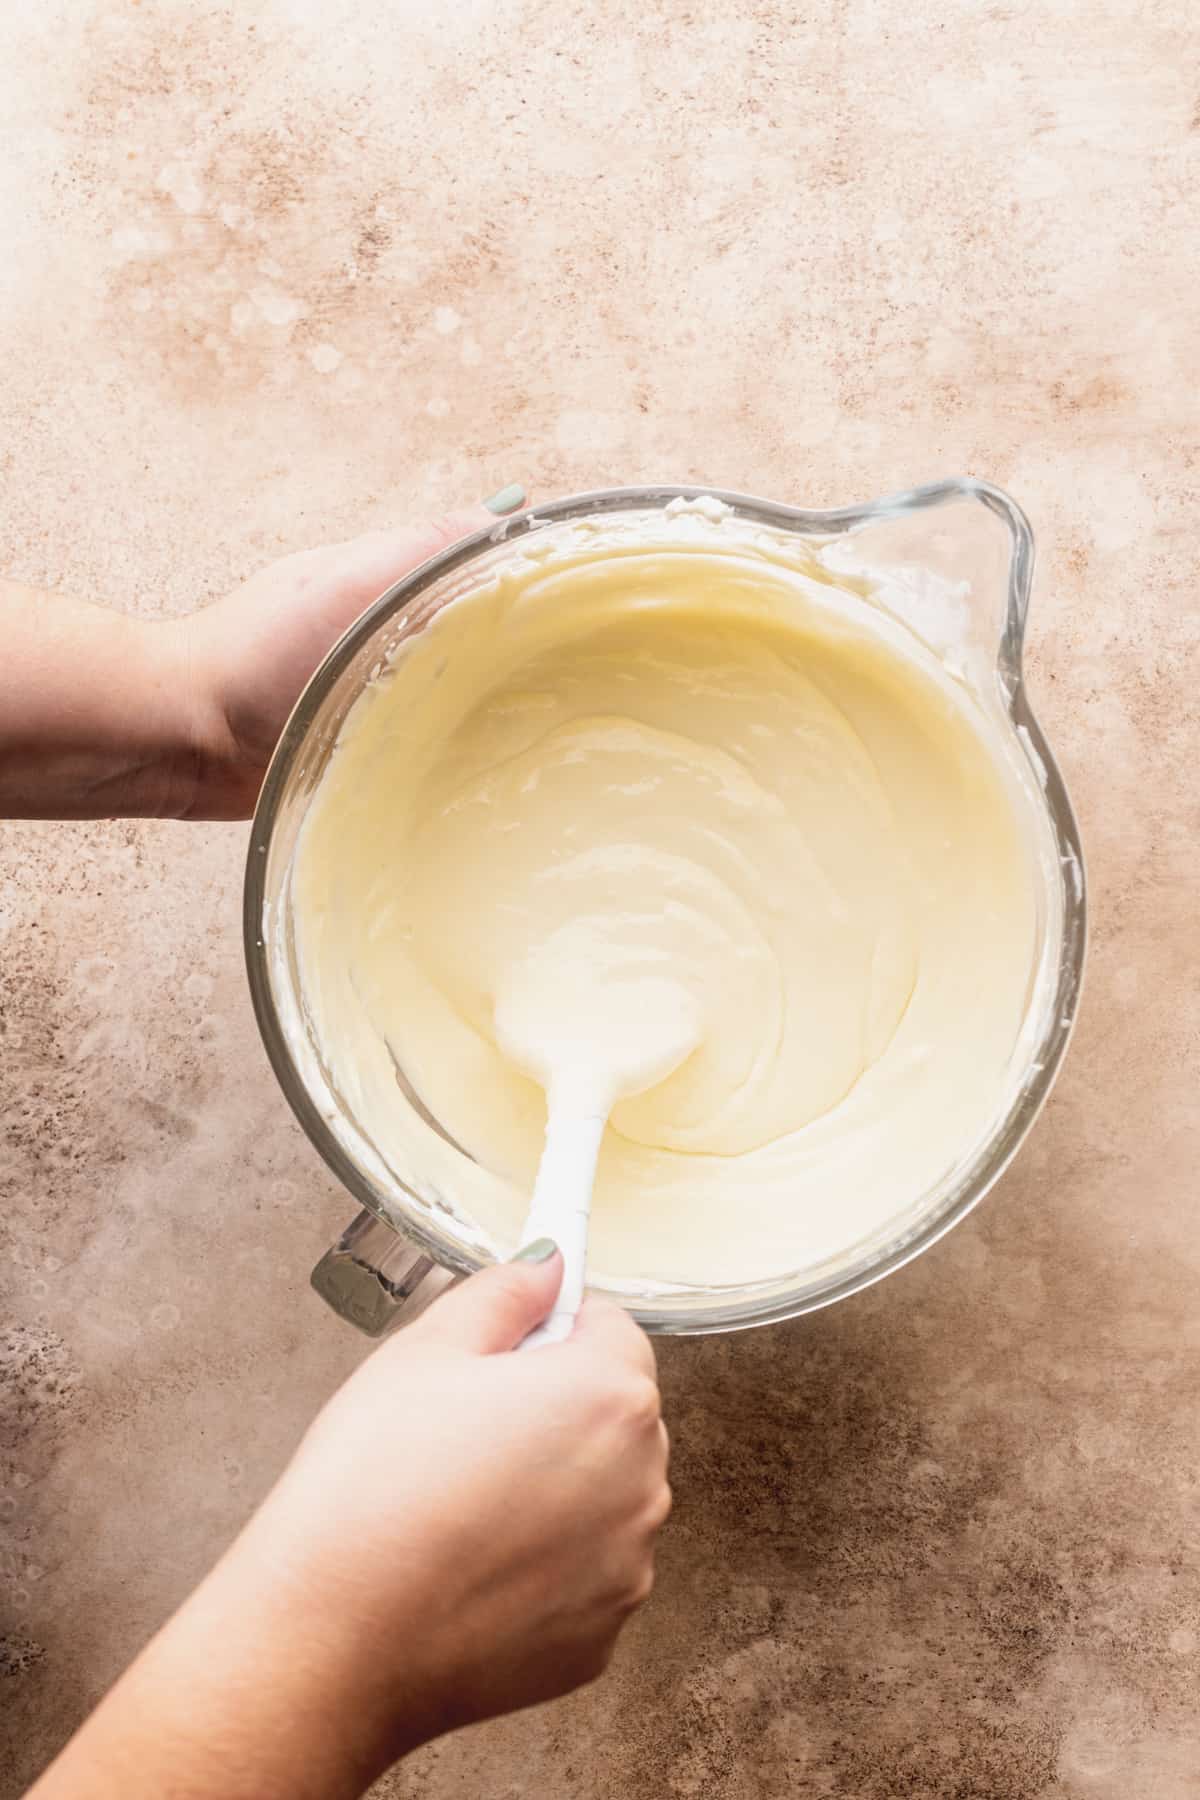 Mixing cheesecake batter in a glass bowl.